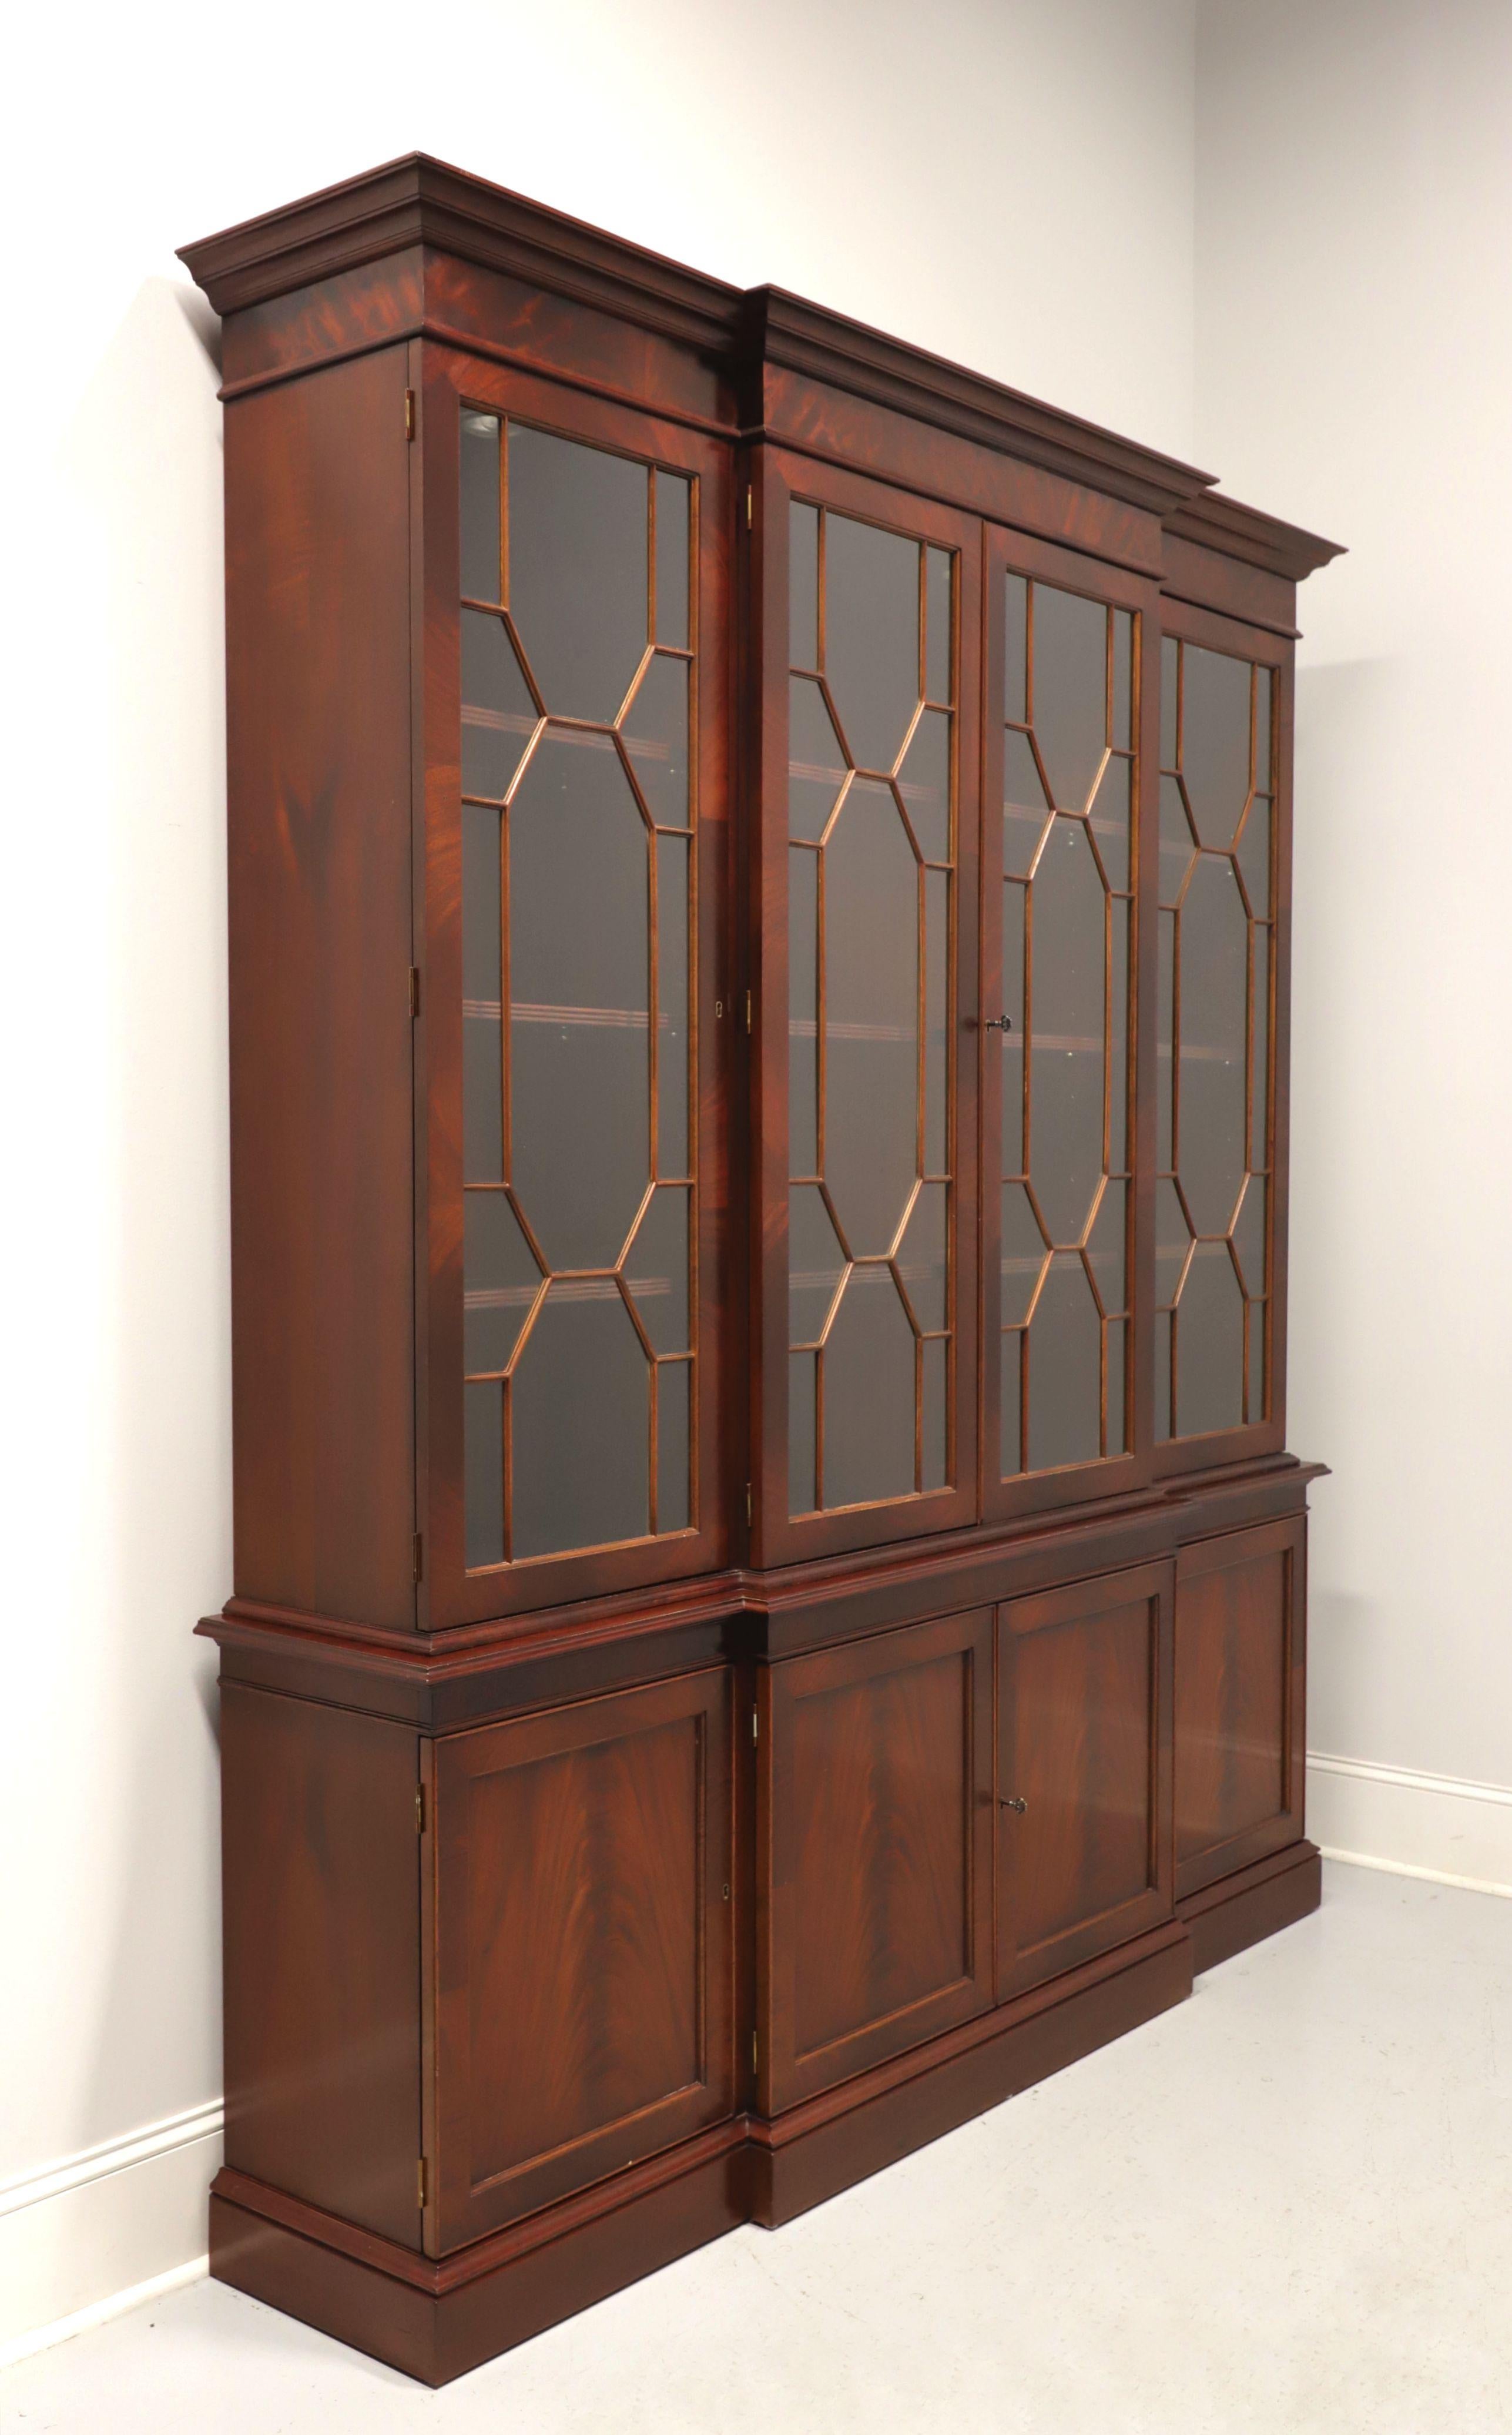 A Chippendale style breakfront china cabinet, unbranded, similar quality to Century or Hickory Chair. Flame mahogany with brass hardware and crown molding at top. Upper lighted cabinet has three separate areas with dual center and flanking side